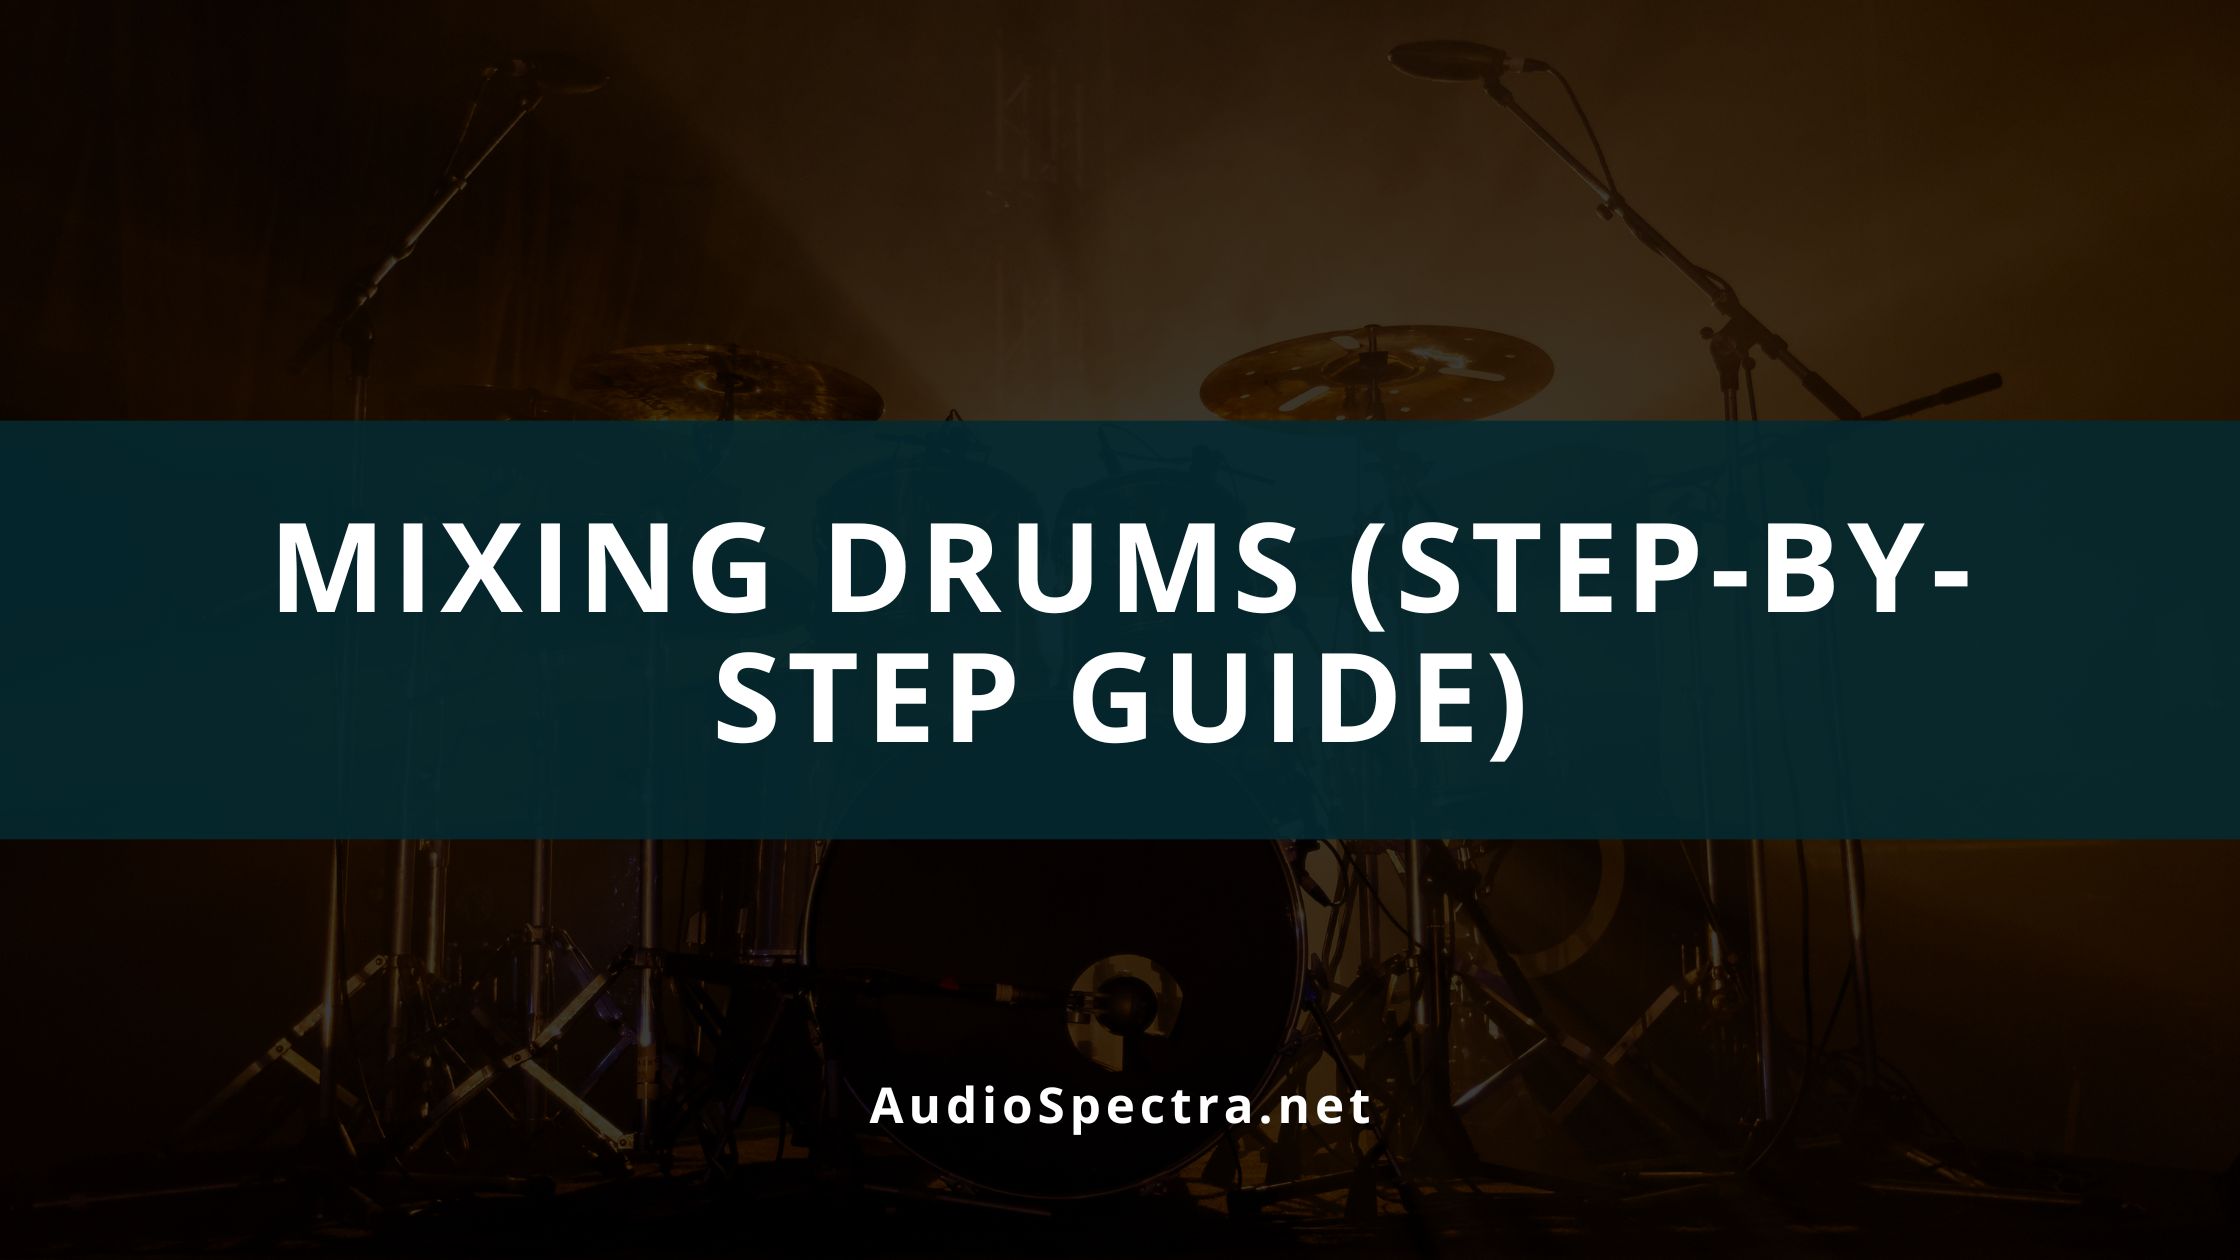 How to Mix Drums Like a Pro